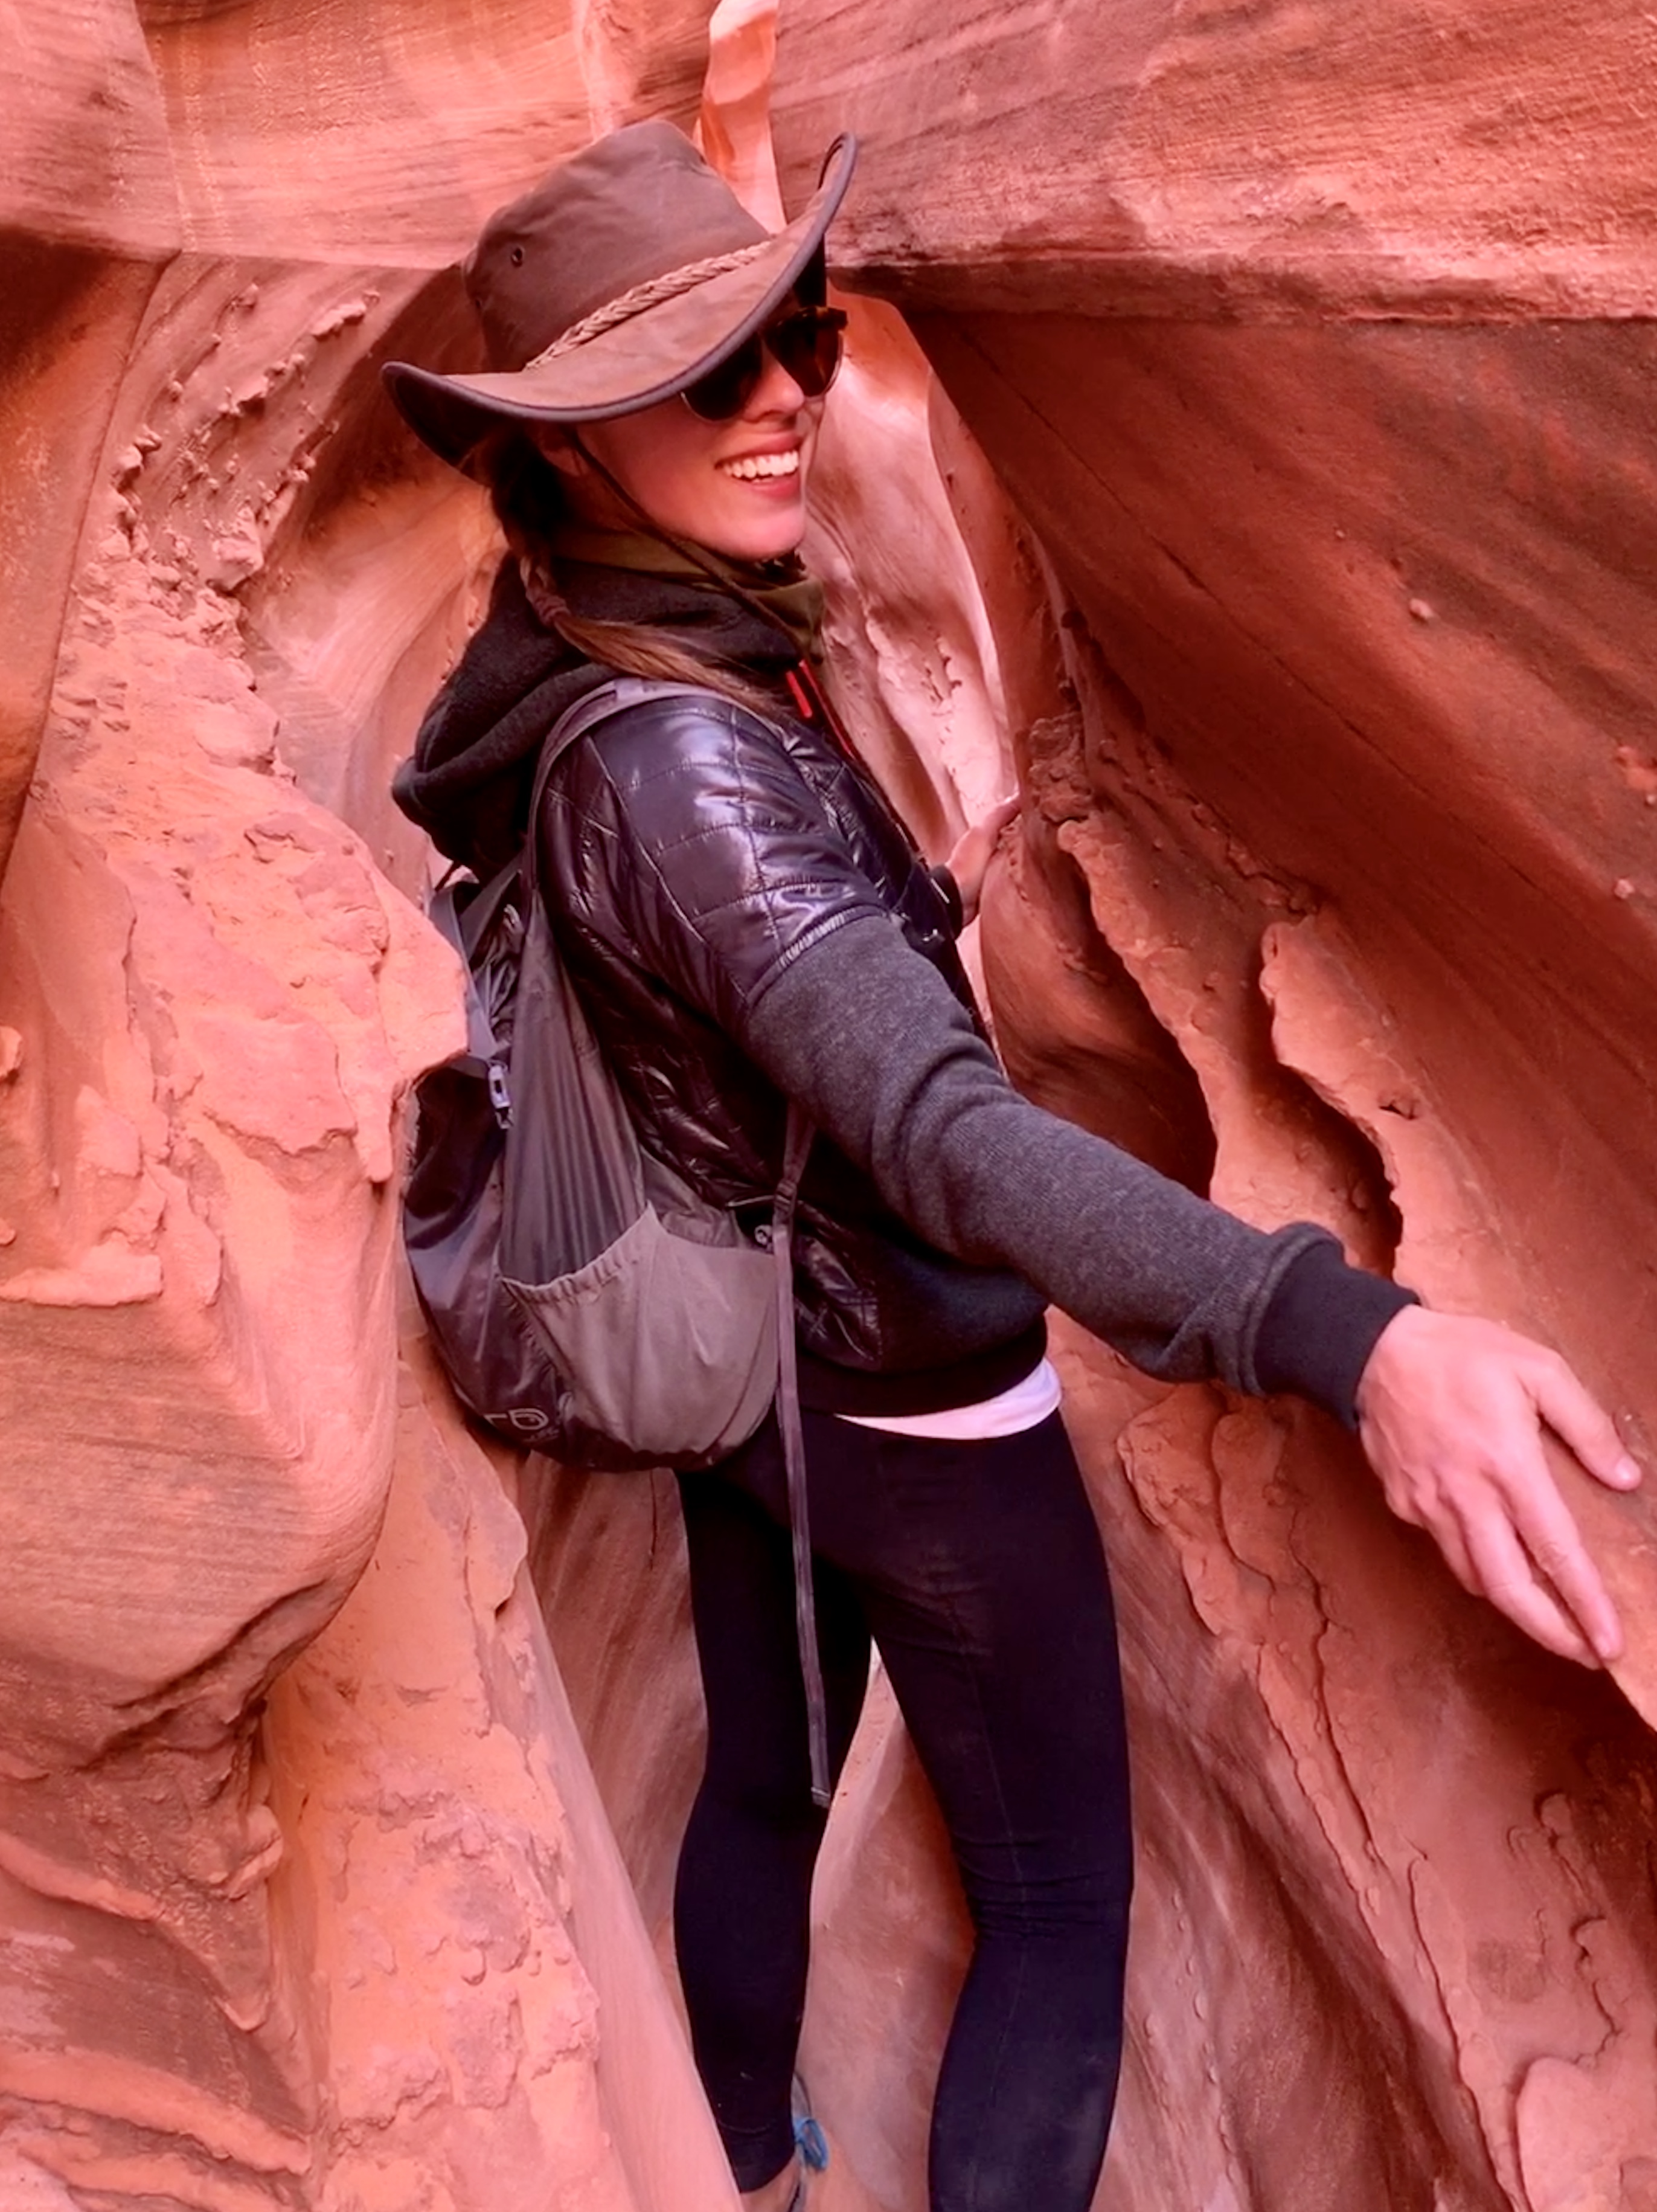 Spooky Peek A Boo Gulch Slot Canyons Escalante TravelSages